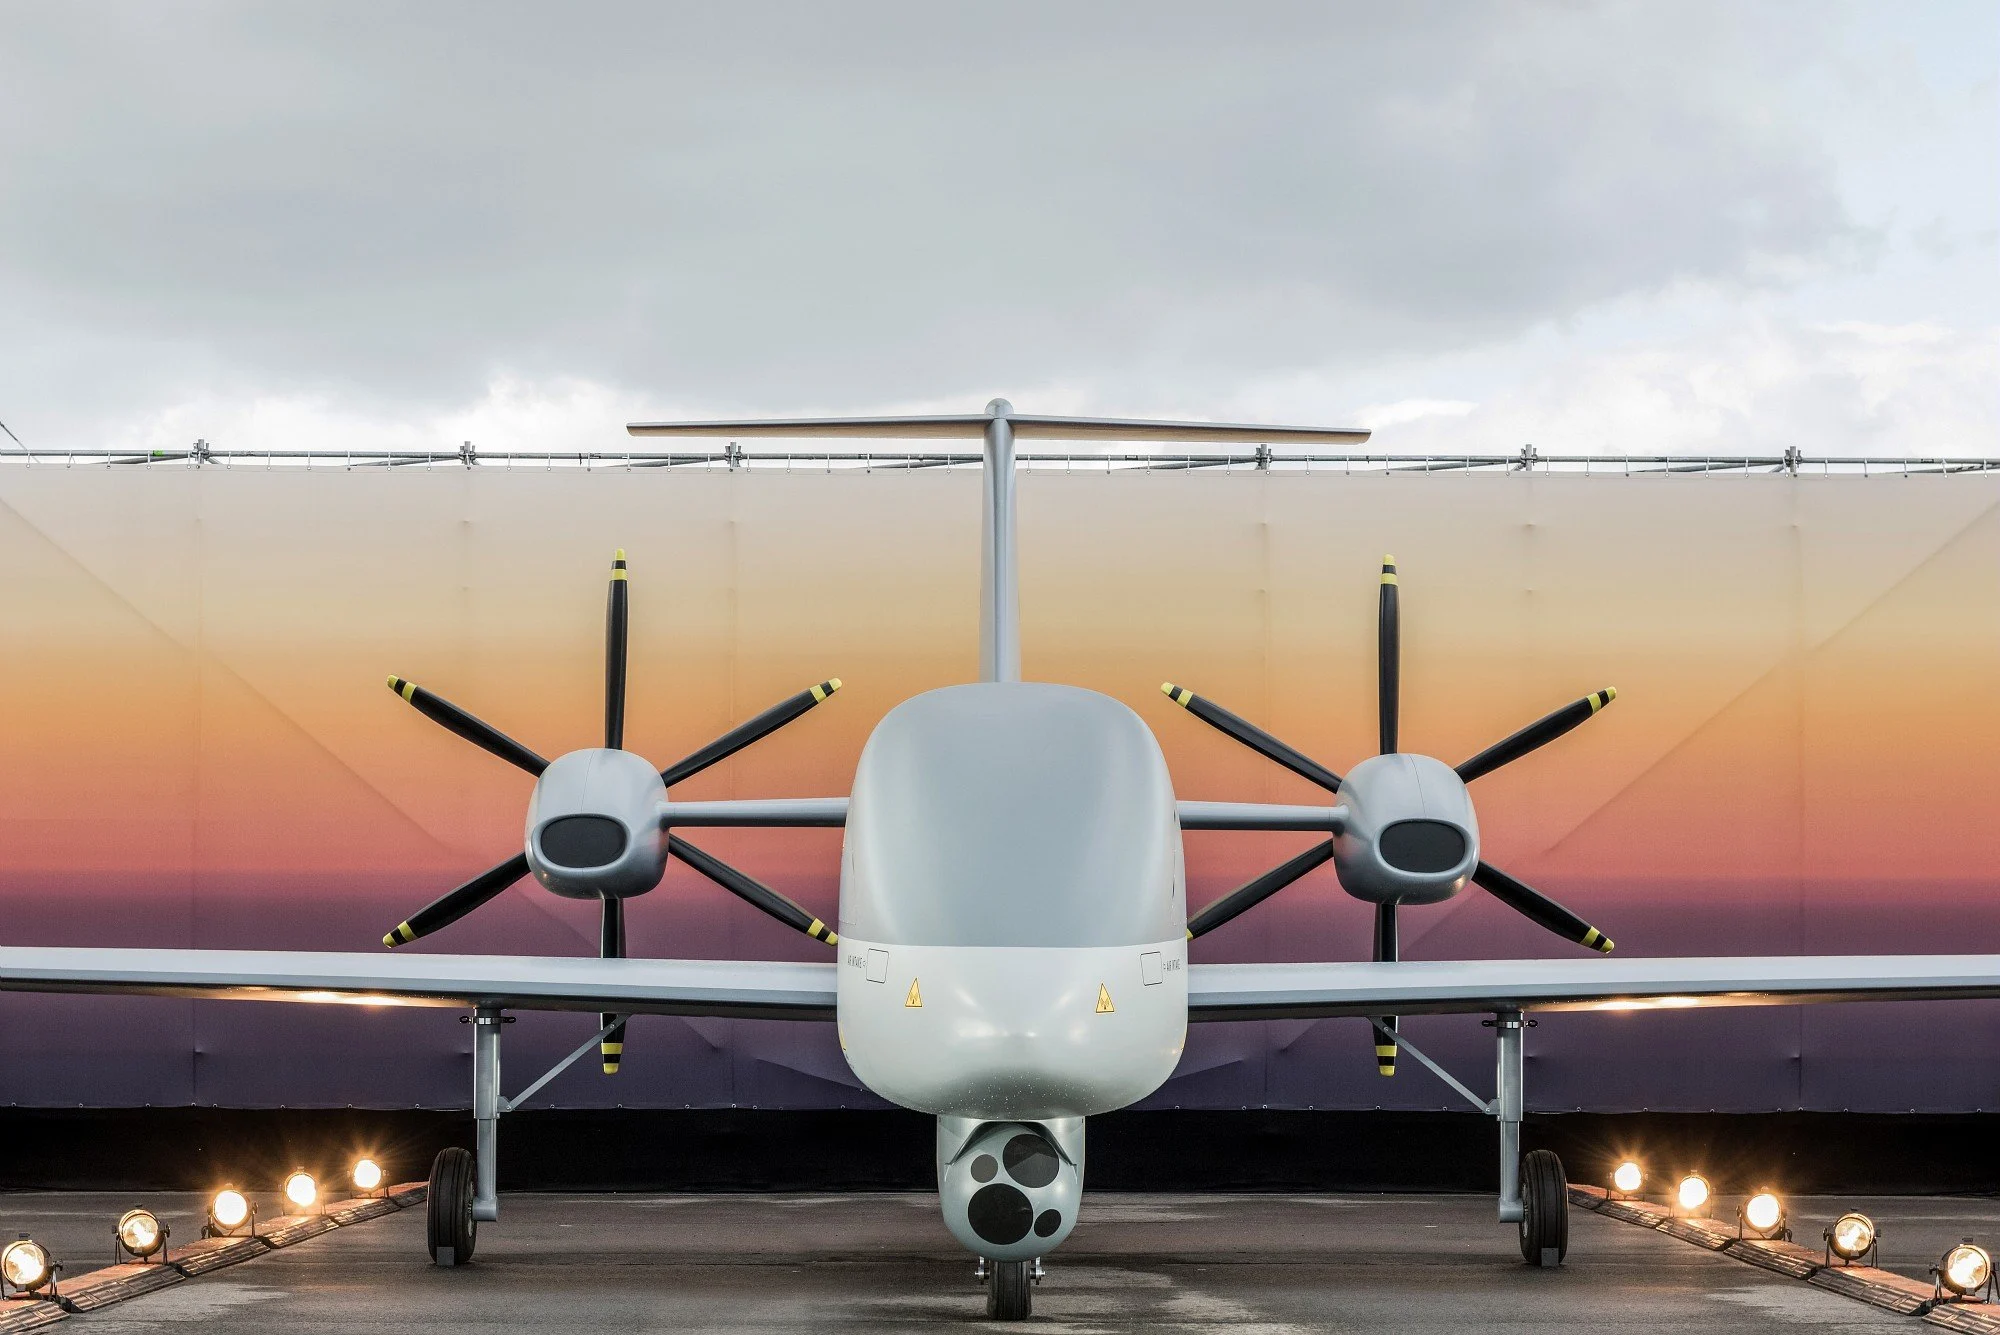 Airbus unveils Eurodrone attack drone with Hellfire missiles and Paveway bombs - a contract for the production of 21 UAVs worth €7.1 billion has been signed